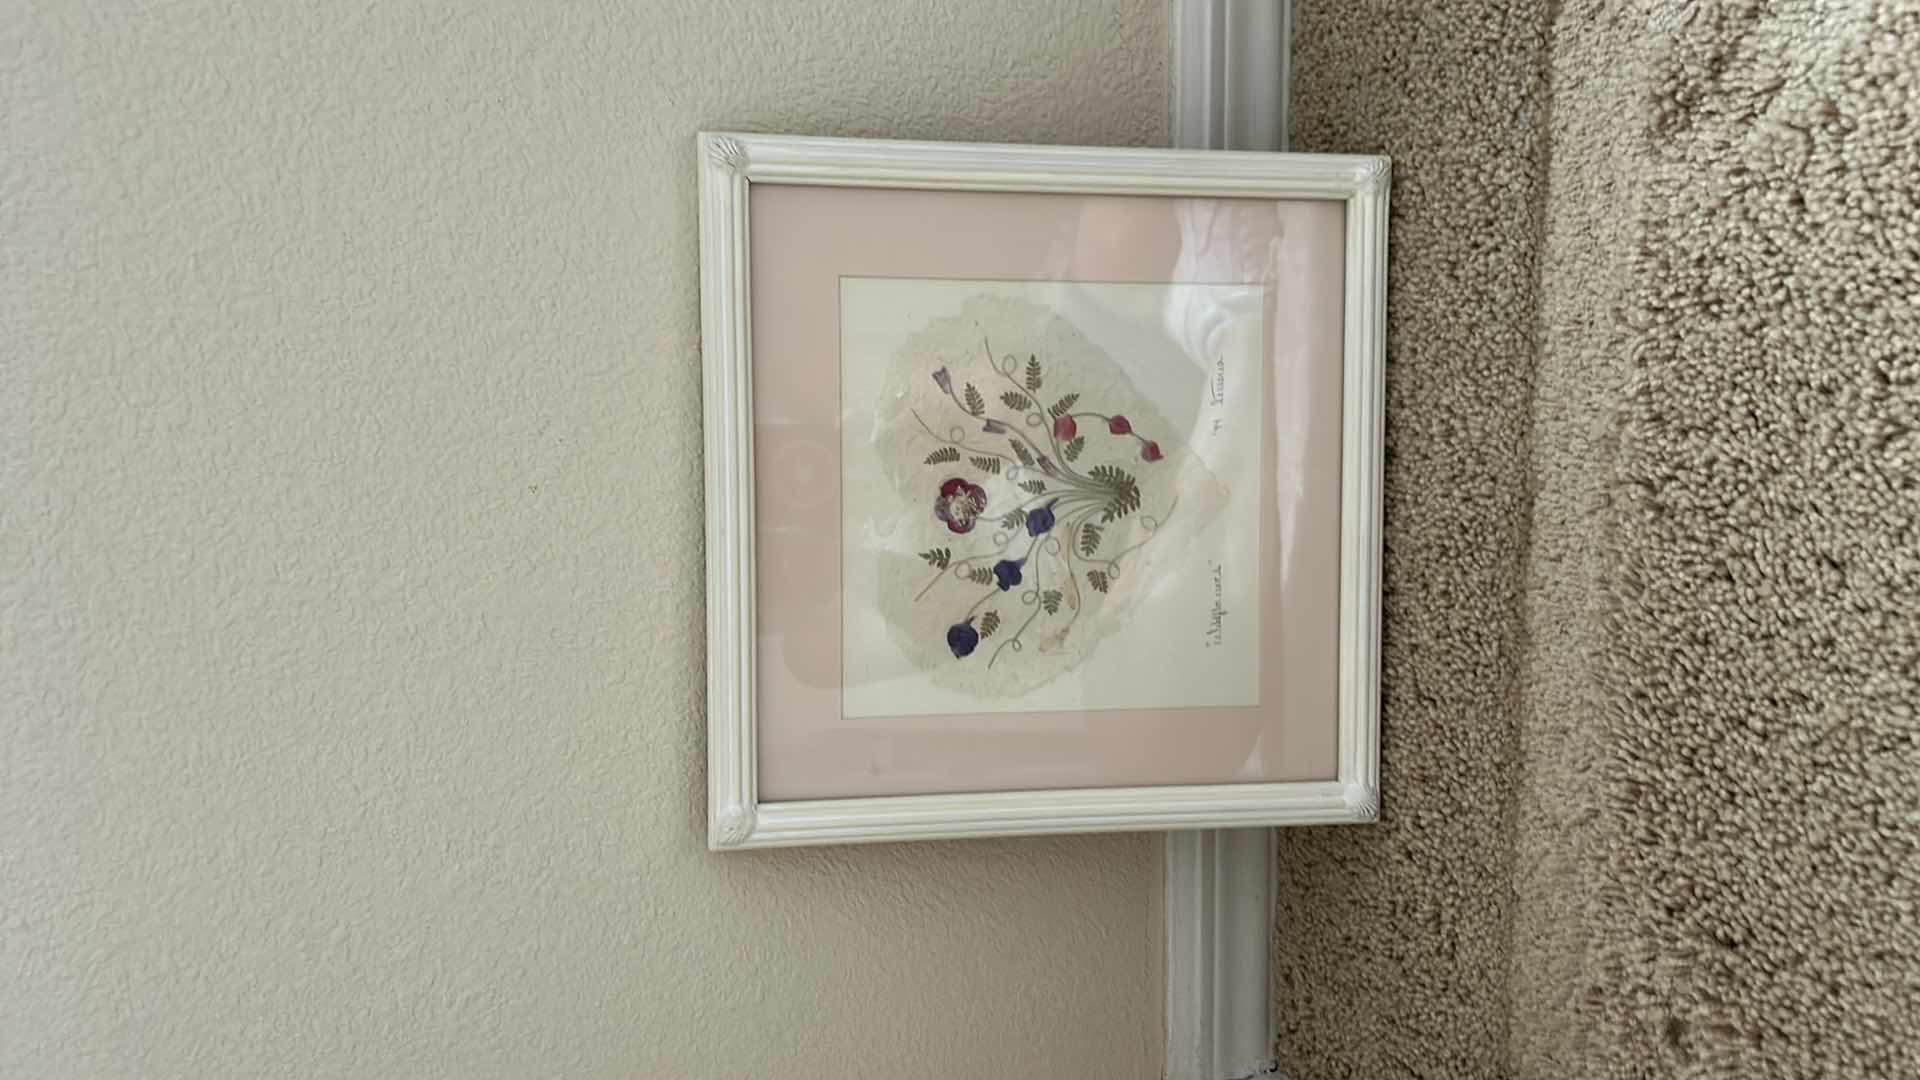 Photo 5 of "Wildflowers" signed pressed flower heart artwork framed 11“ x 11“